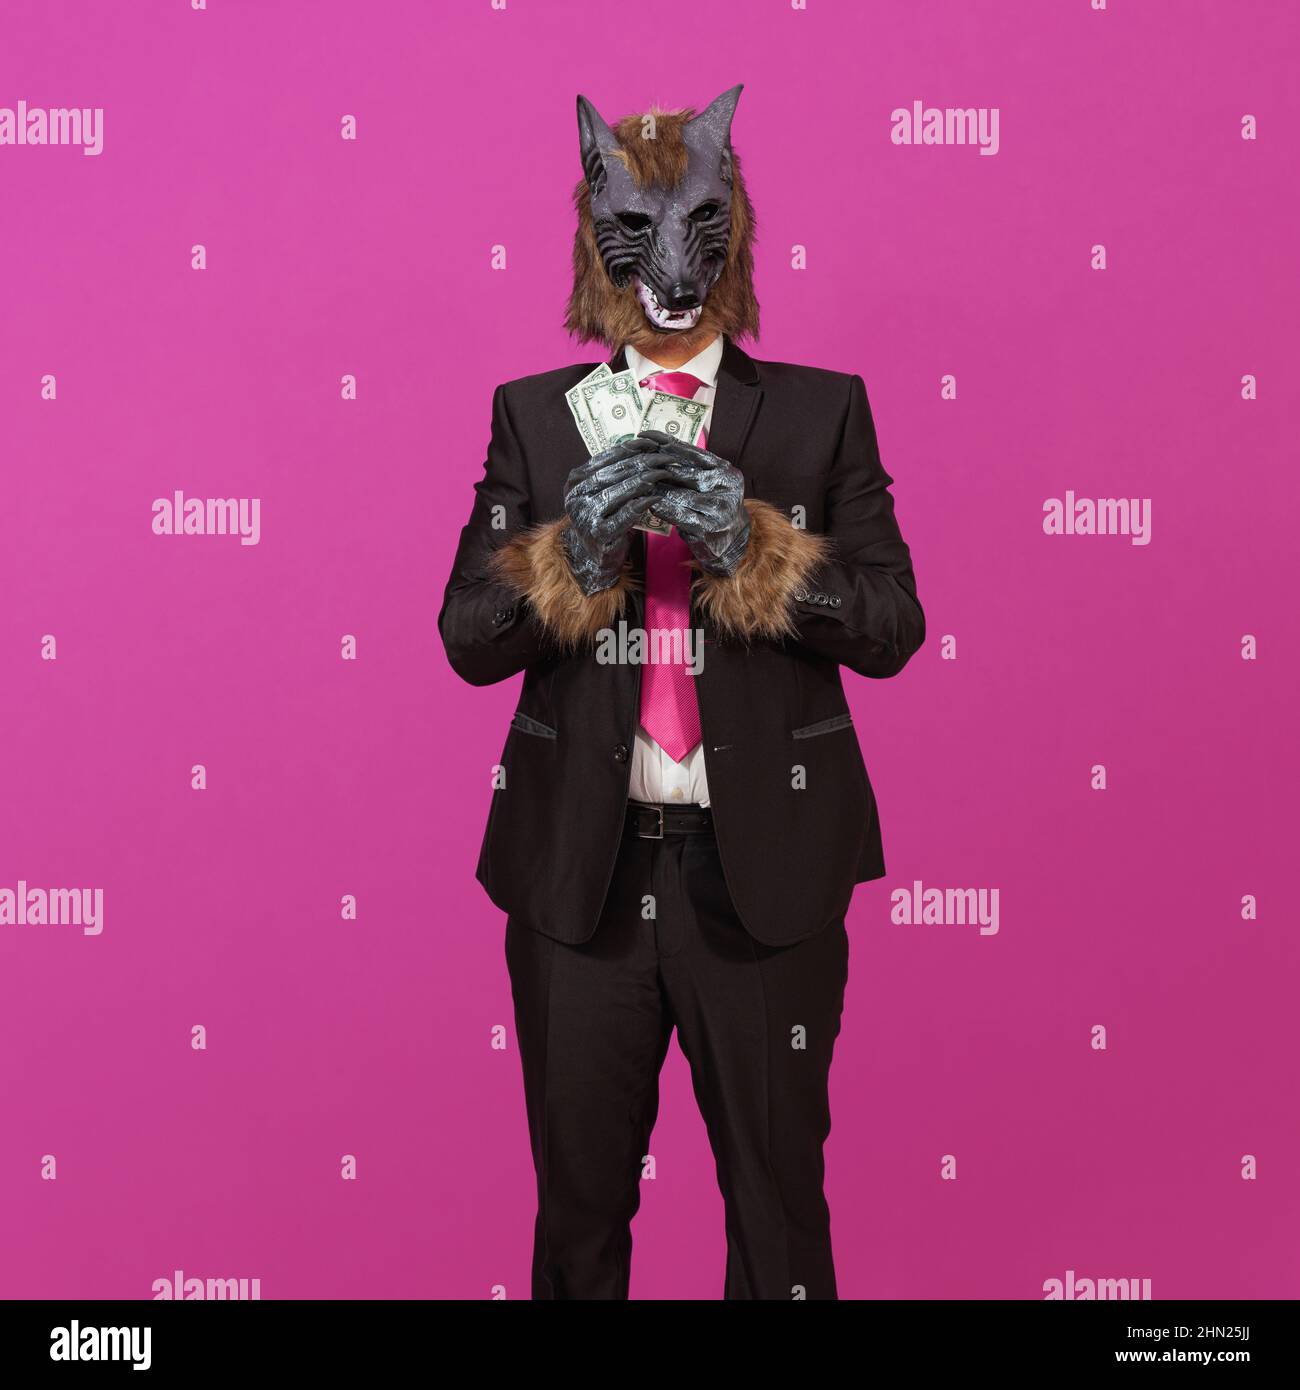 Against A Pink Background Is A Man Dressed In A Black Suit With Jacket, A  White Shirt And Tie, Wearing A Werewolf Mask, Holding Three 50 Us Dollar  Bil Stock Photo - Alamy